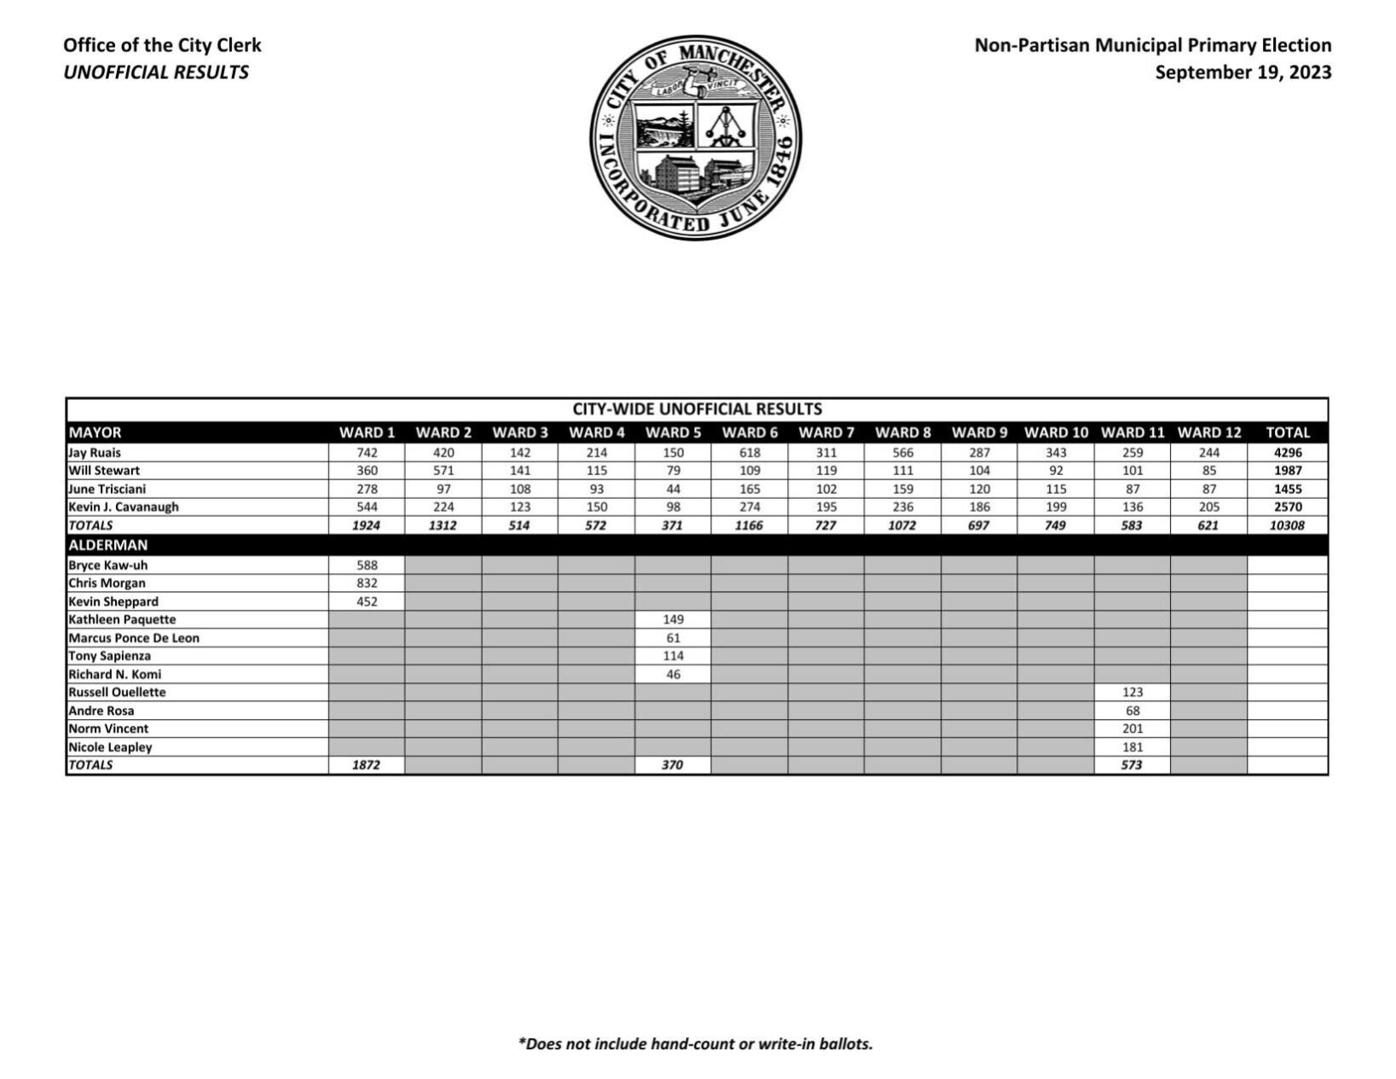 Unofficial Manchester Municipal Primary results